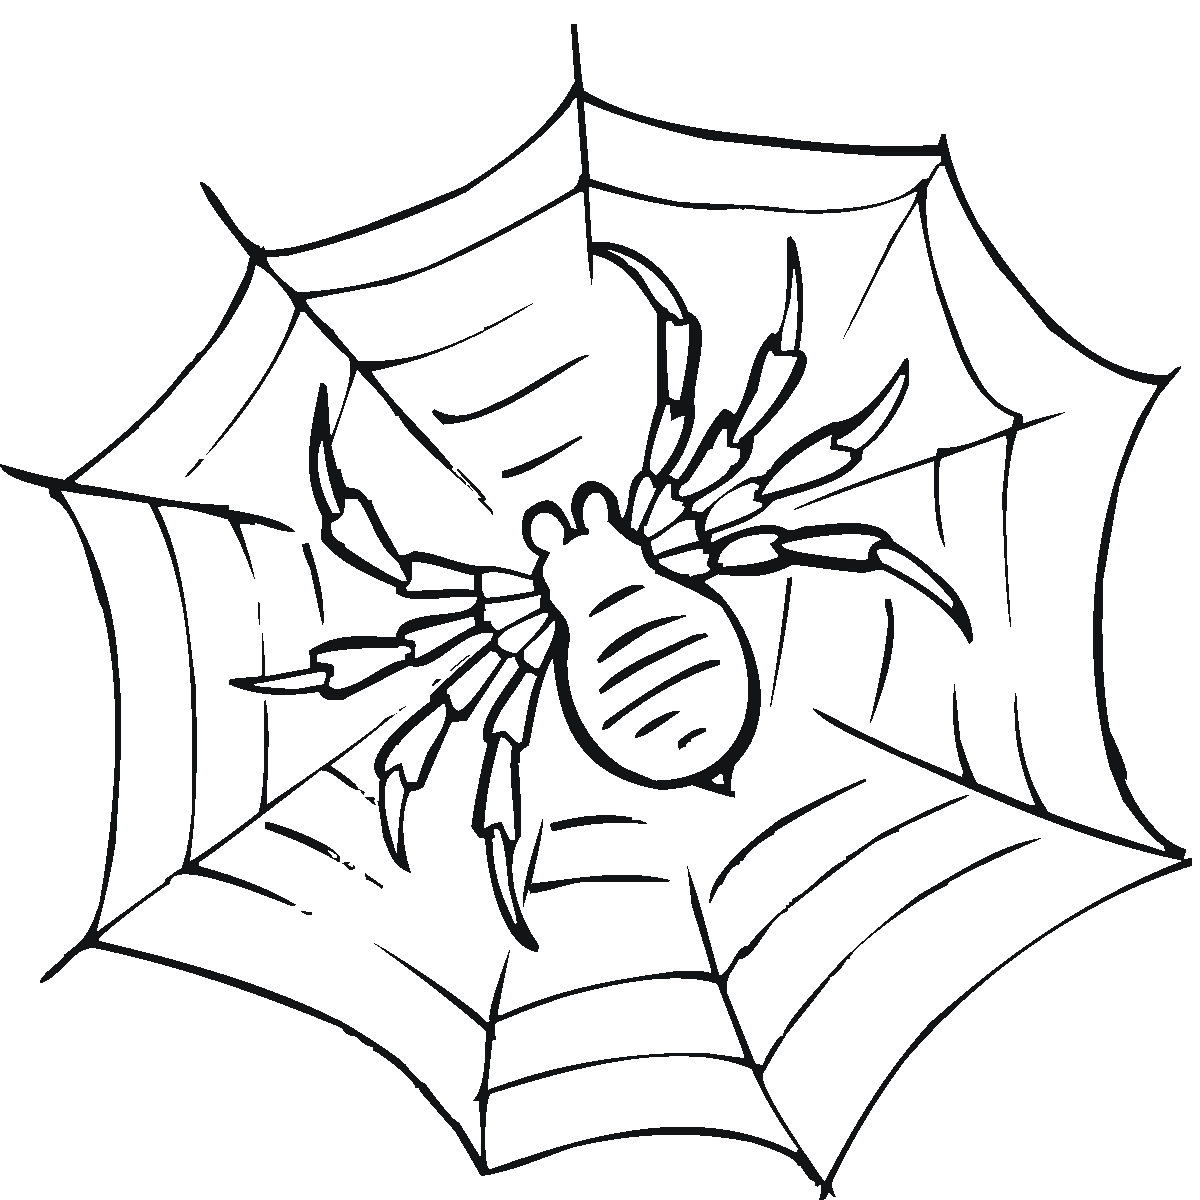 free-coloring-page-of-a-spider-download-free-coloring-page-of-a-spider